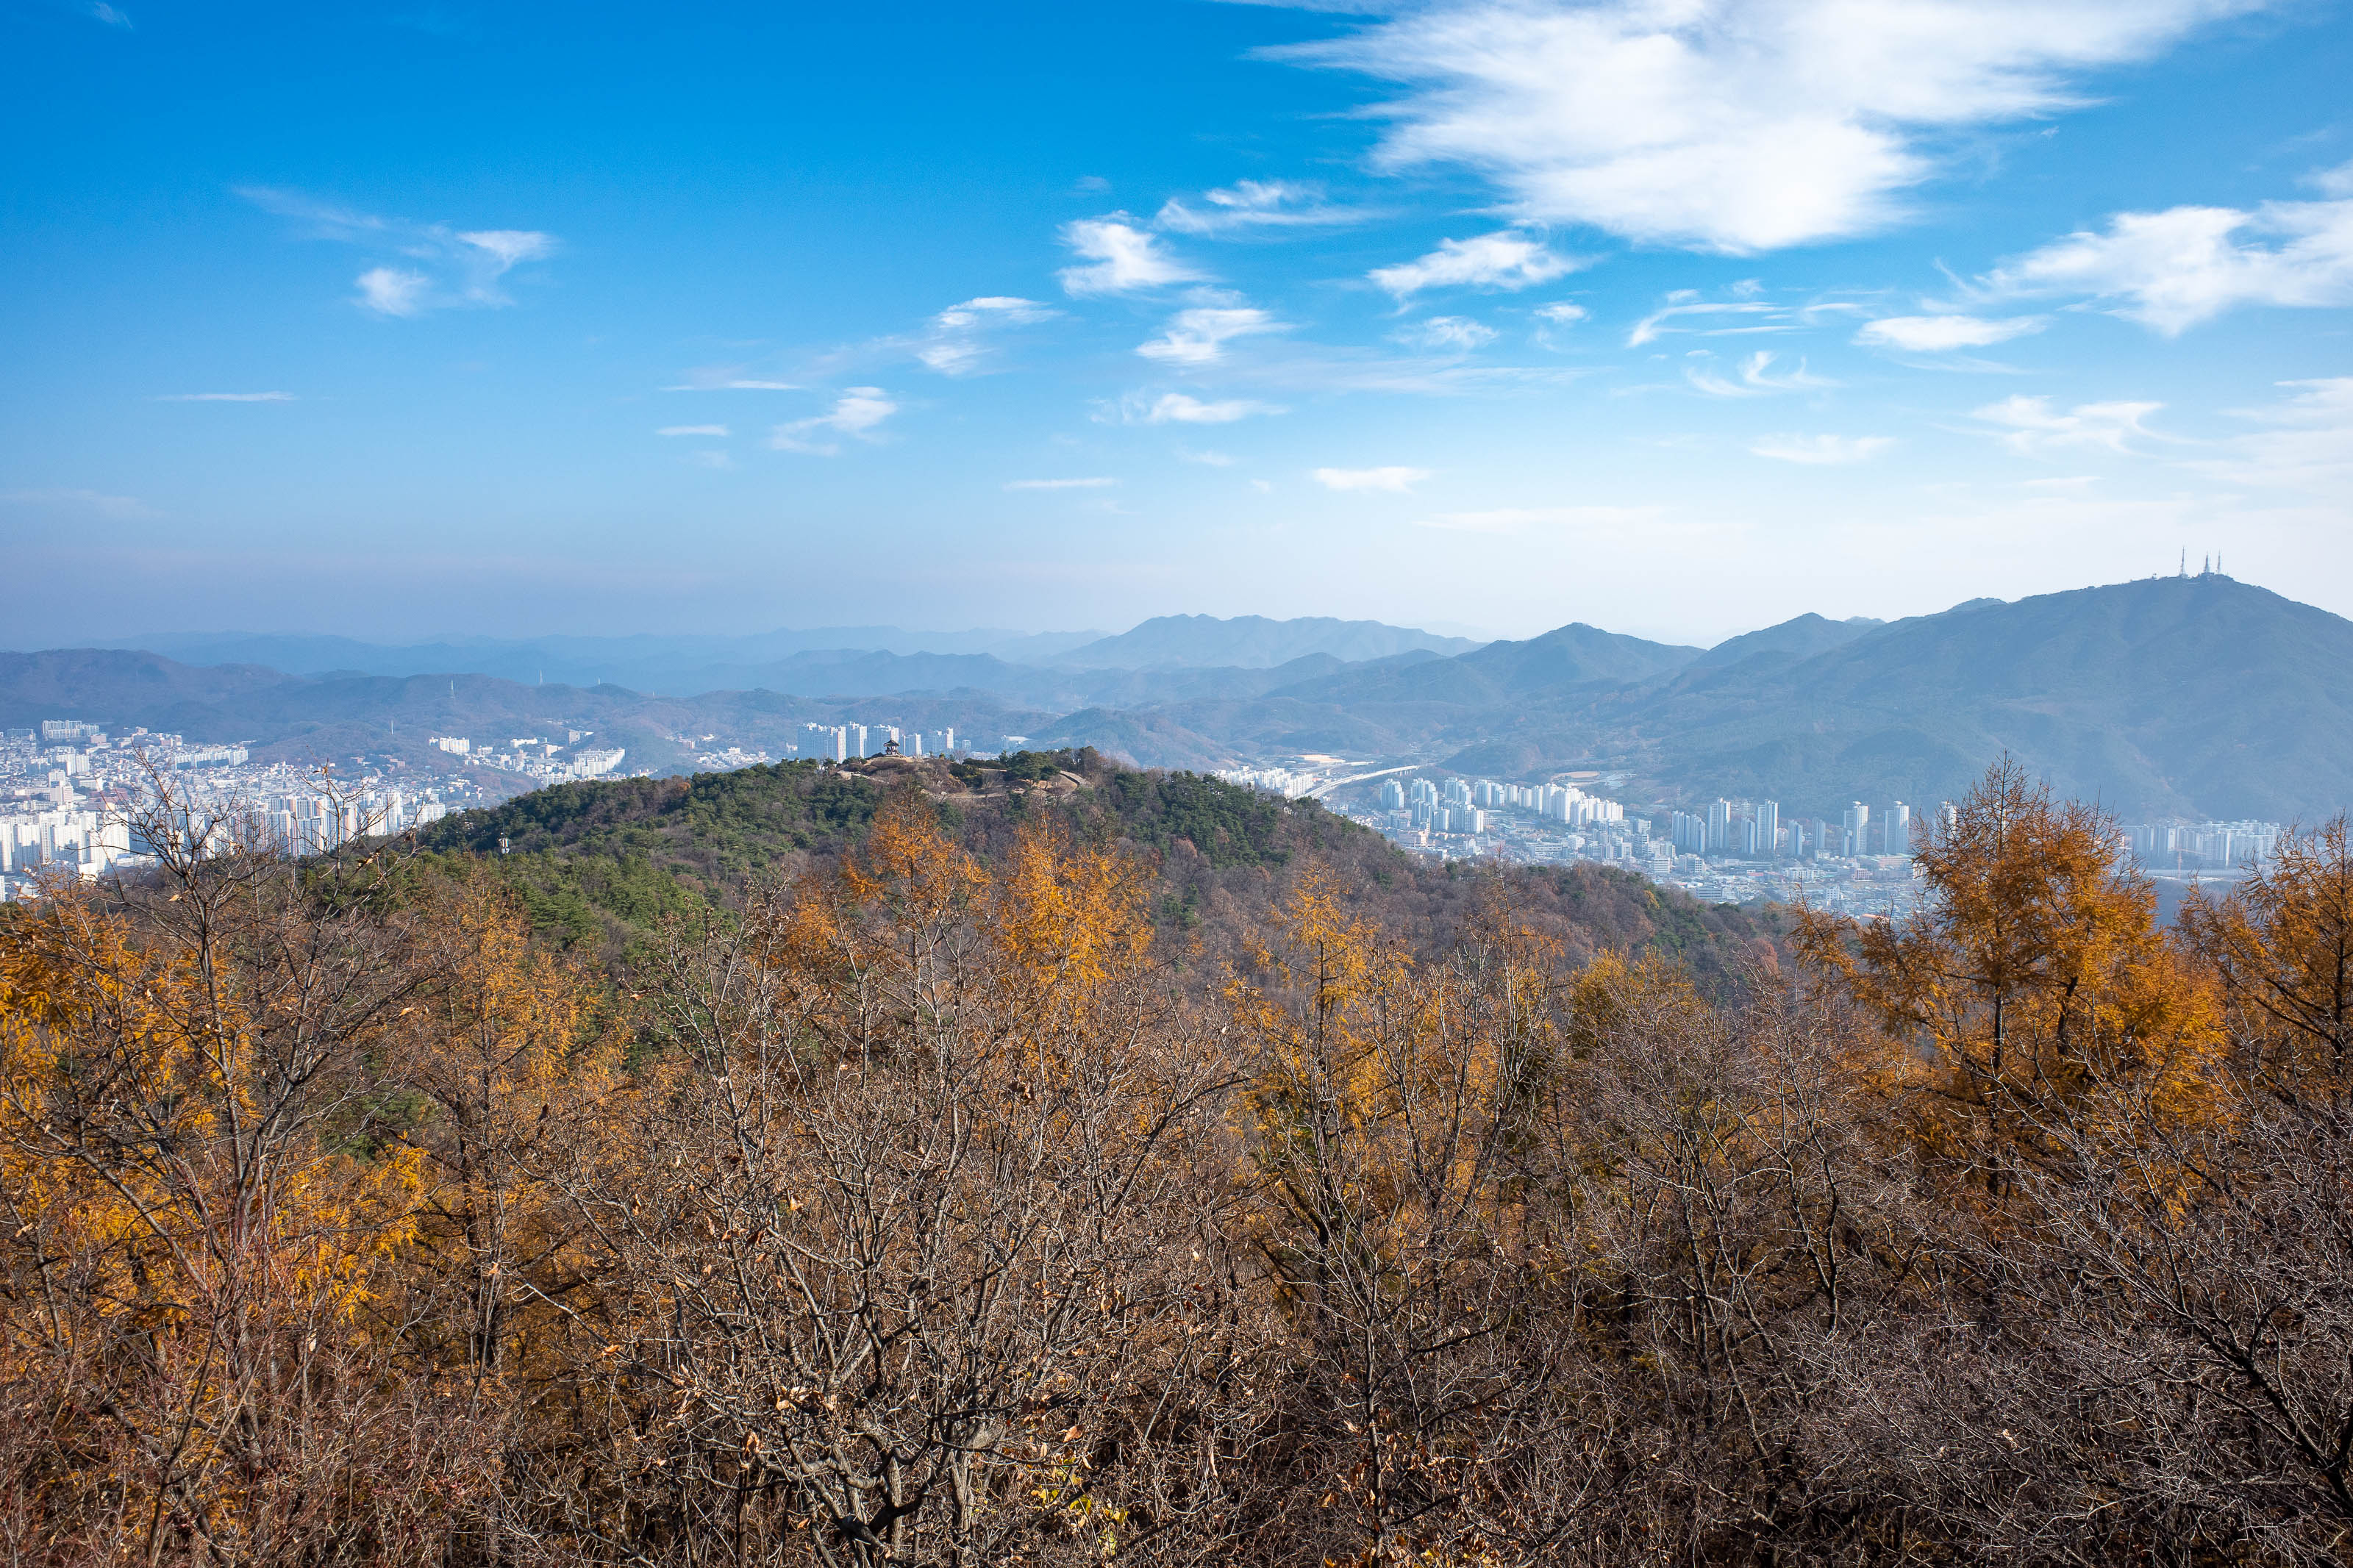 Korean-Hiking-Daejeon-Bomunsan - Here you can see mountain number 2 on the right in the distance, Sikjangsan, with the antennas on top. More antenna photos soon.